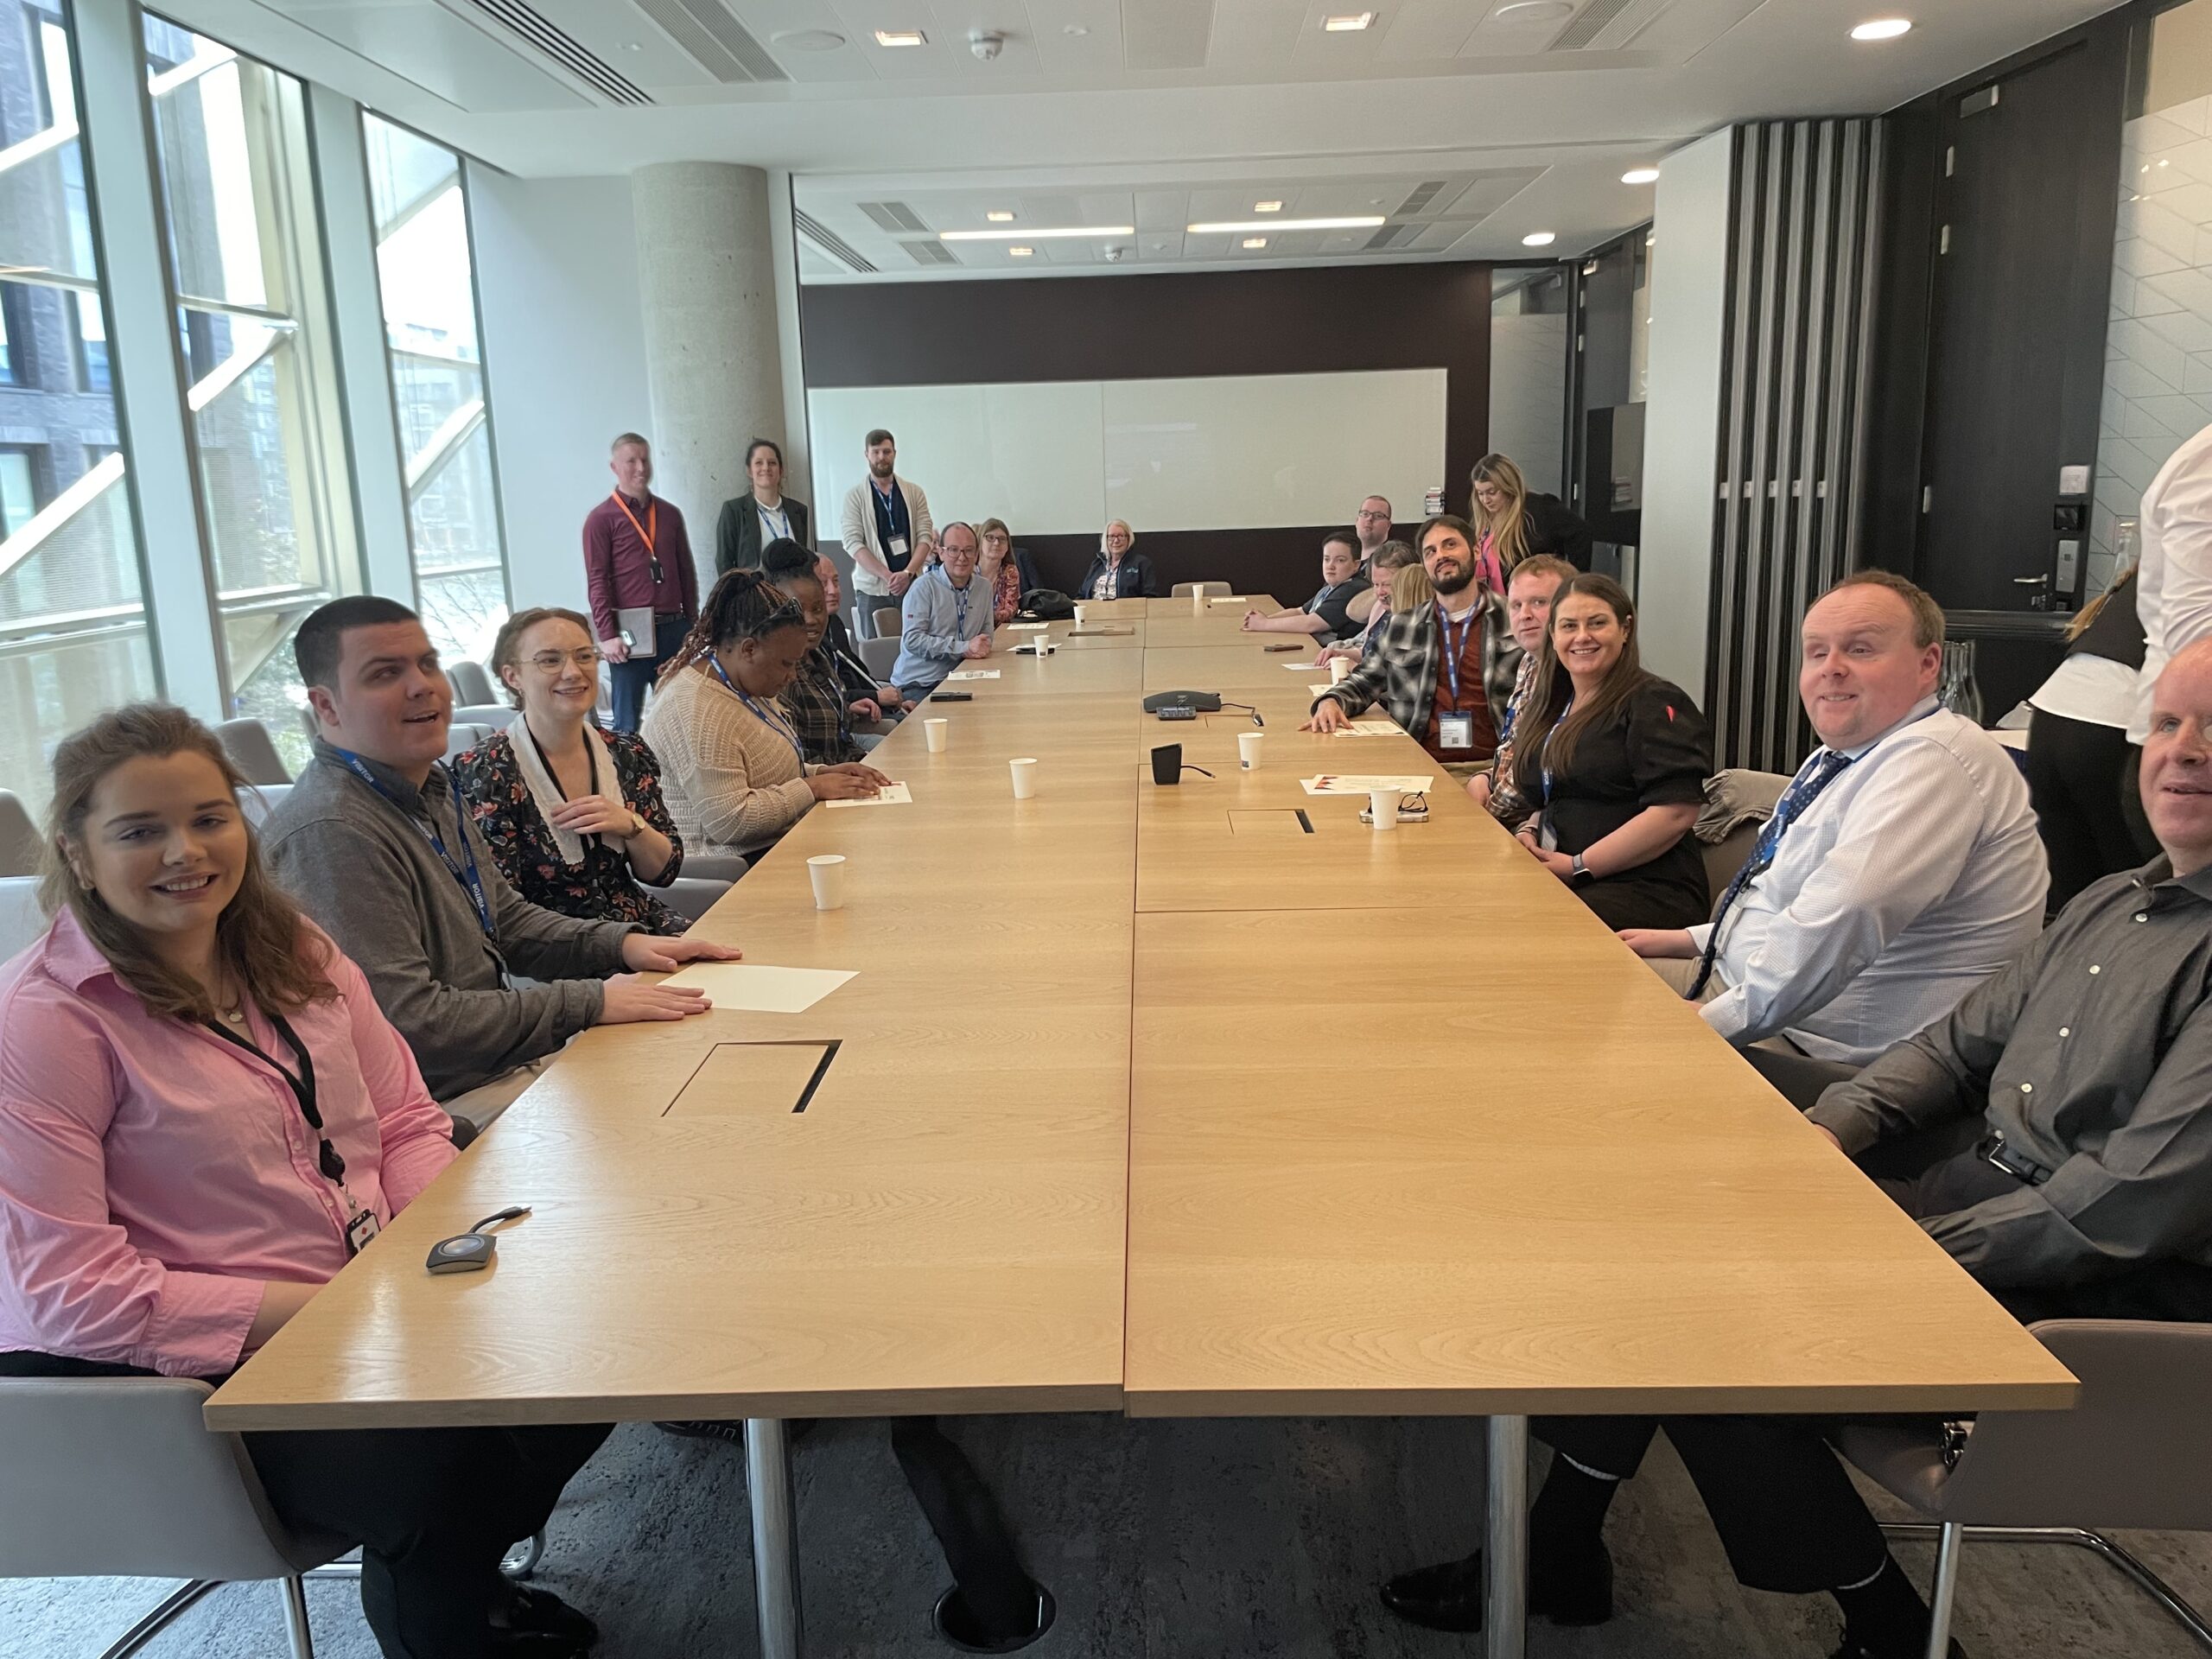 : Vision Ireland staff and National Training Centre students sitting around a long table in the meeting room in the Central Bank office. There are also a few staff members from Central Bank Present. Most people are looking at the camera and smiling.